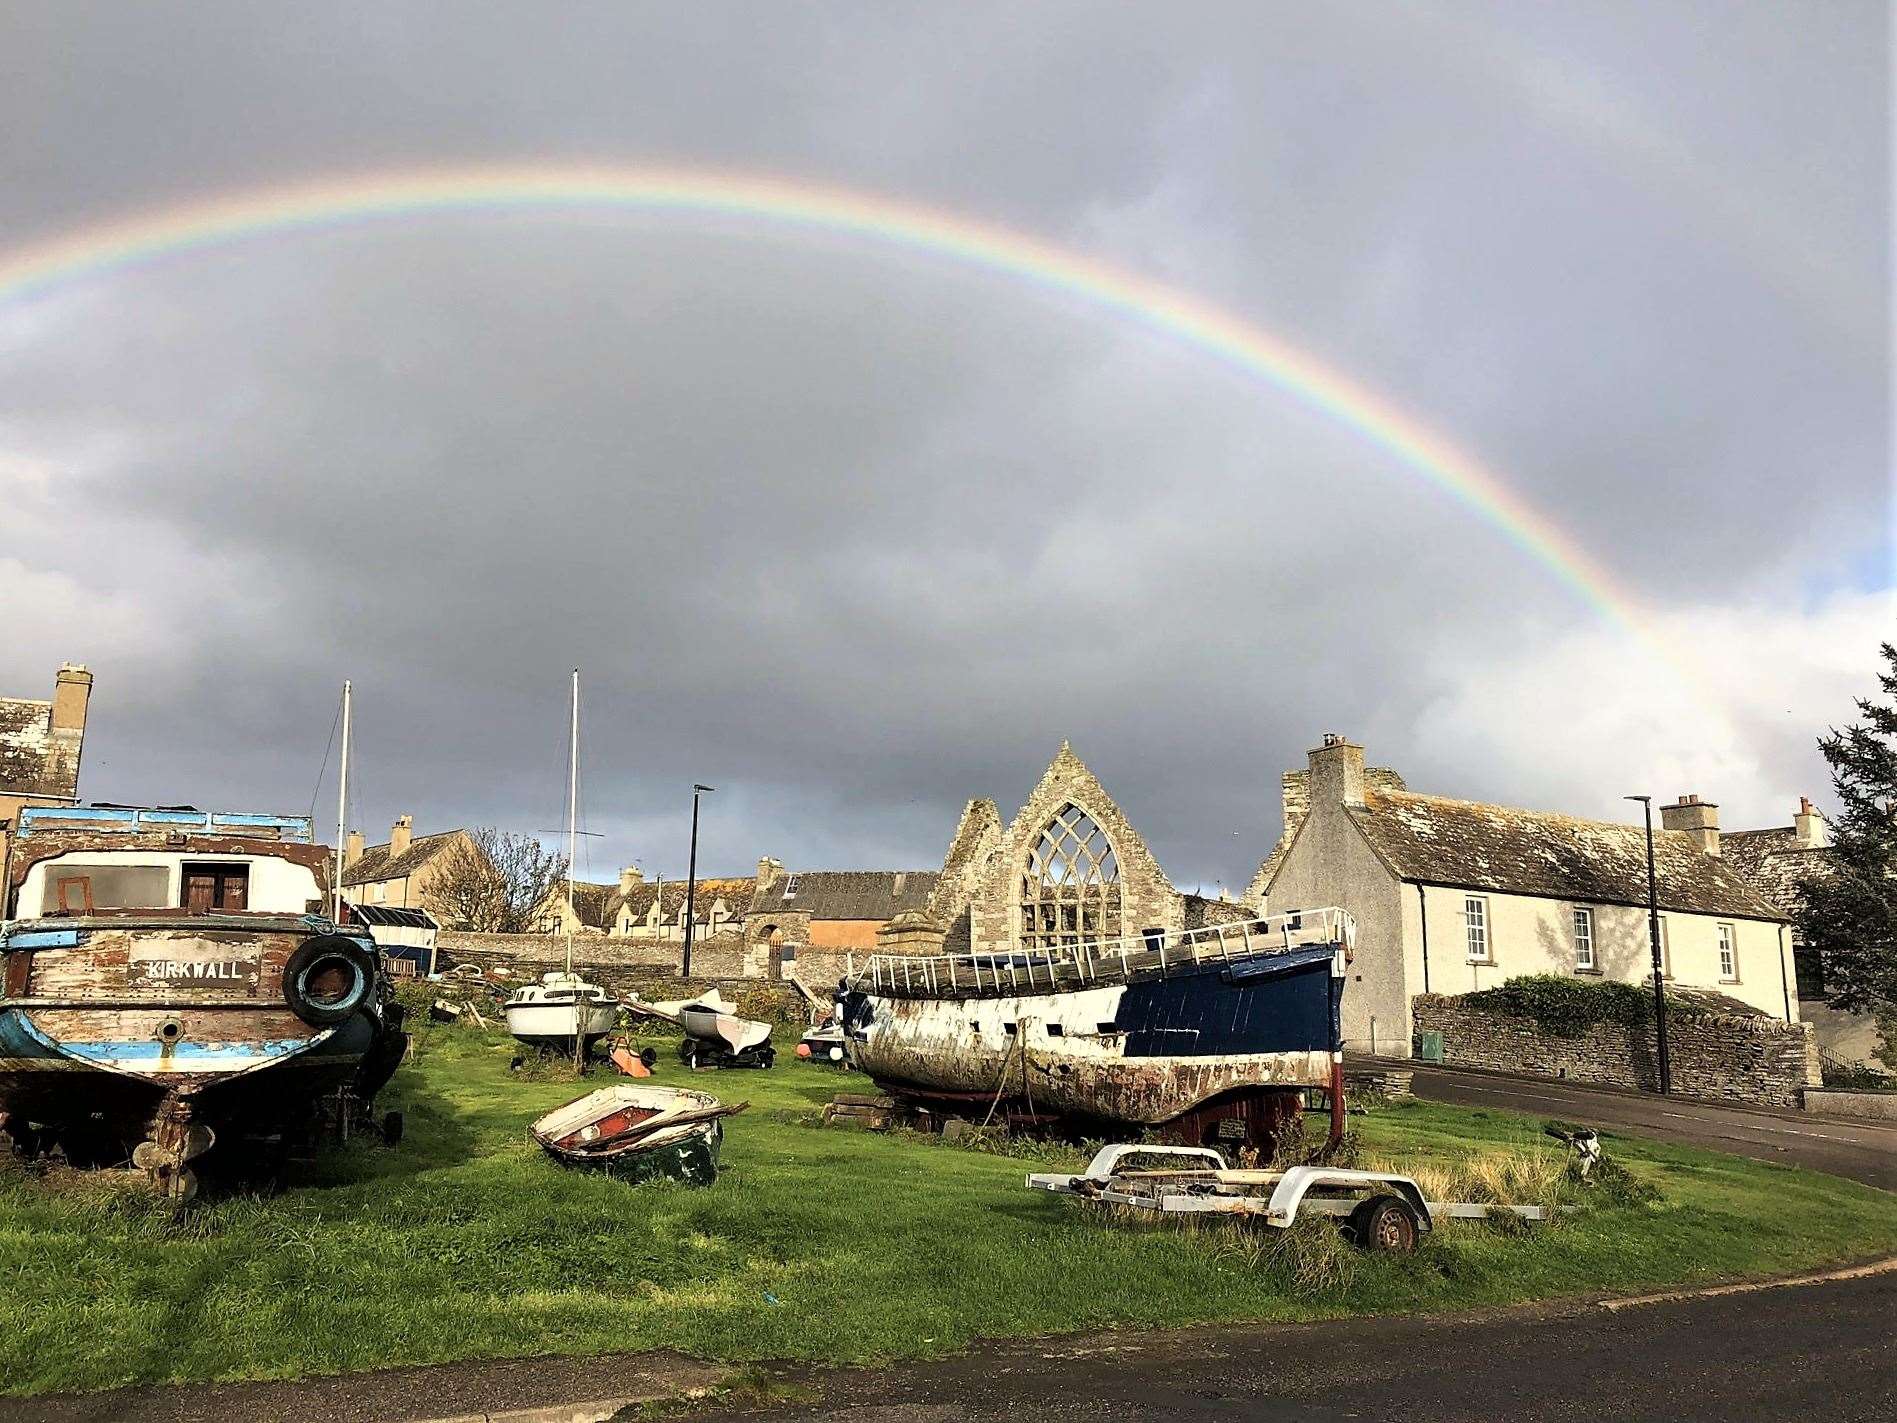 A rainbow over Old St Peter's Church in Thurso by Steve McKinnel.